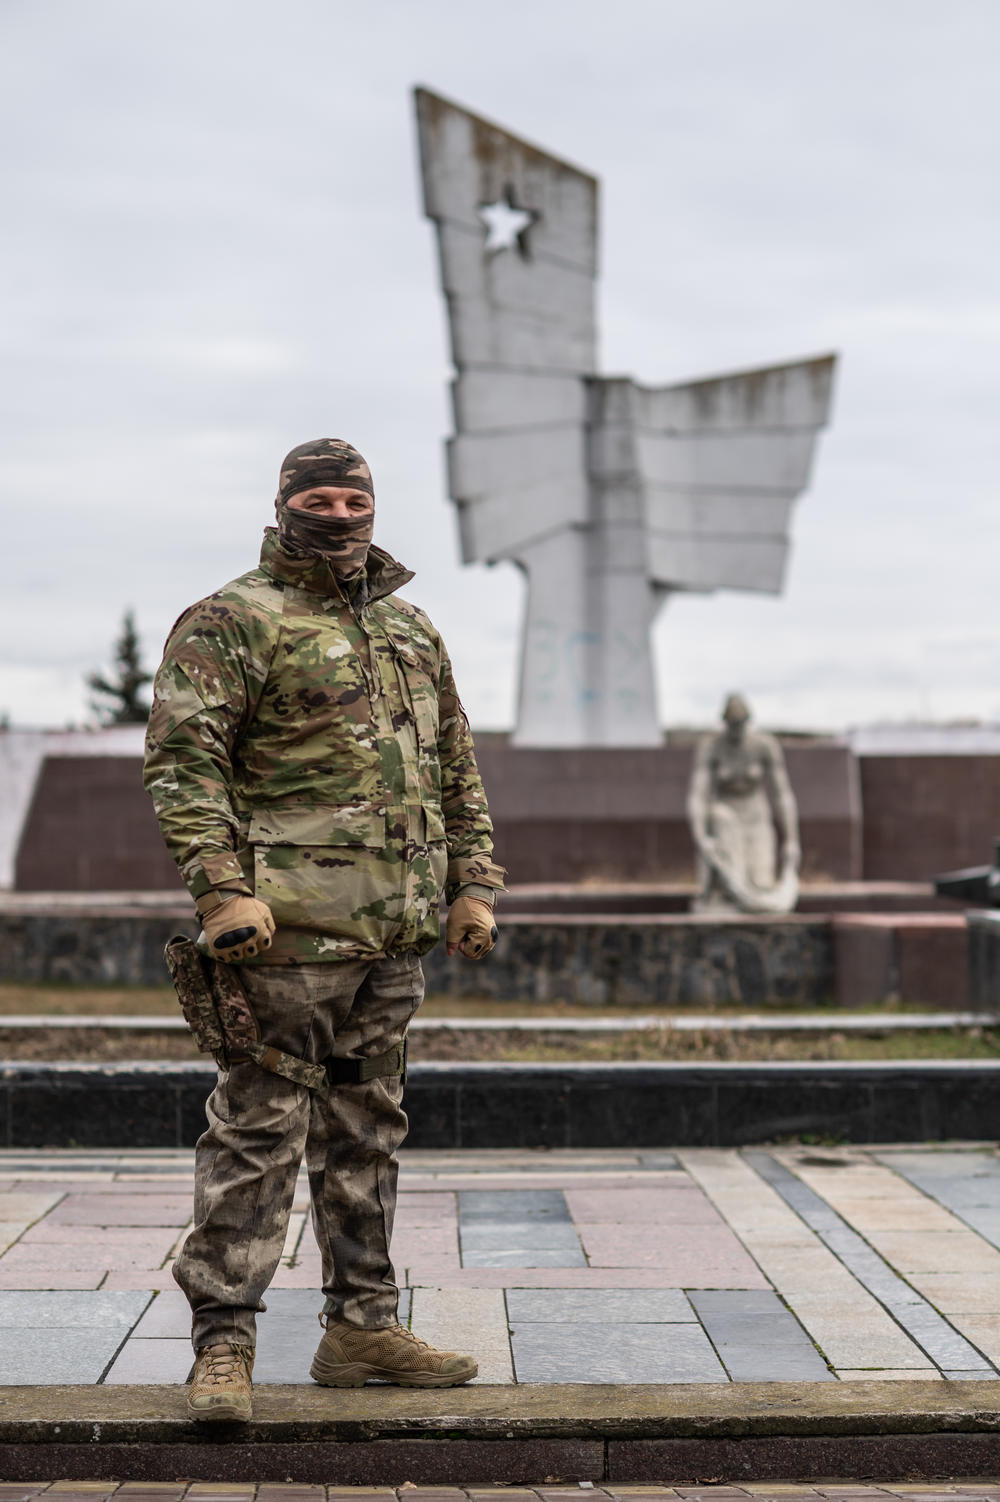 Serhiy, a soldier who cannot show his face or reveal his last name as he has family in occupied territory, poses in front of a World War II memorial in Kherson, Ukraine.